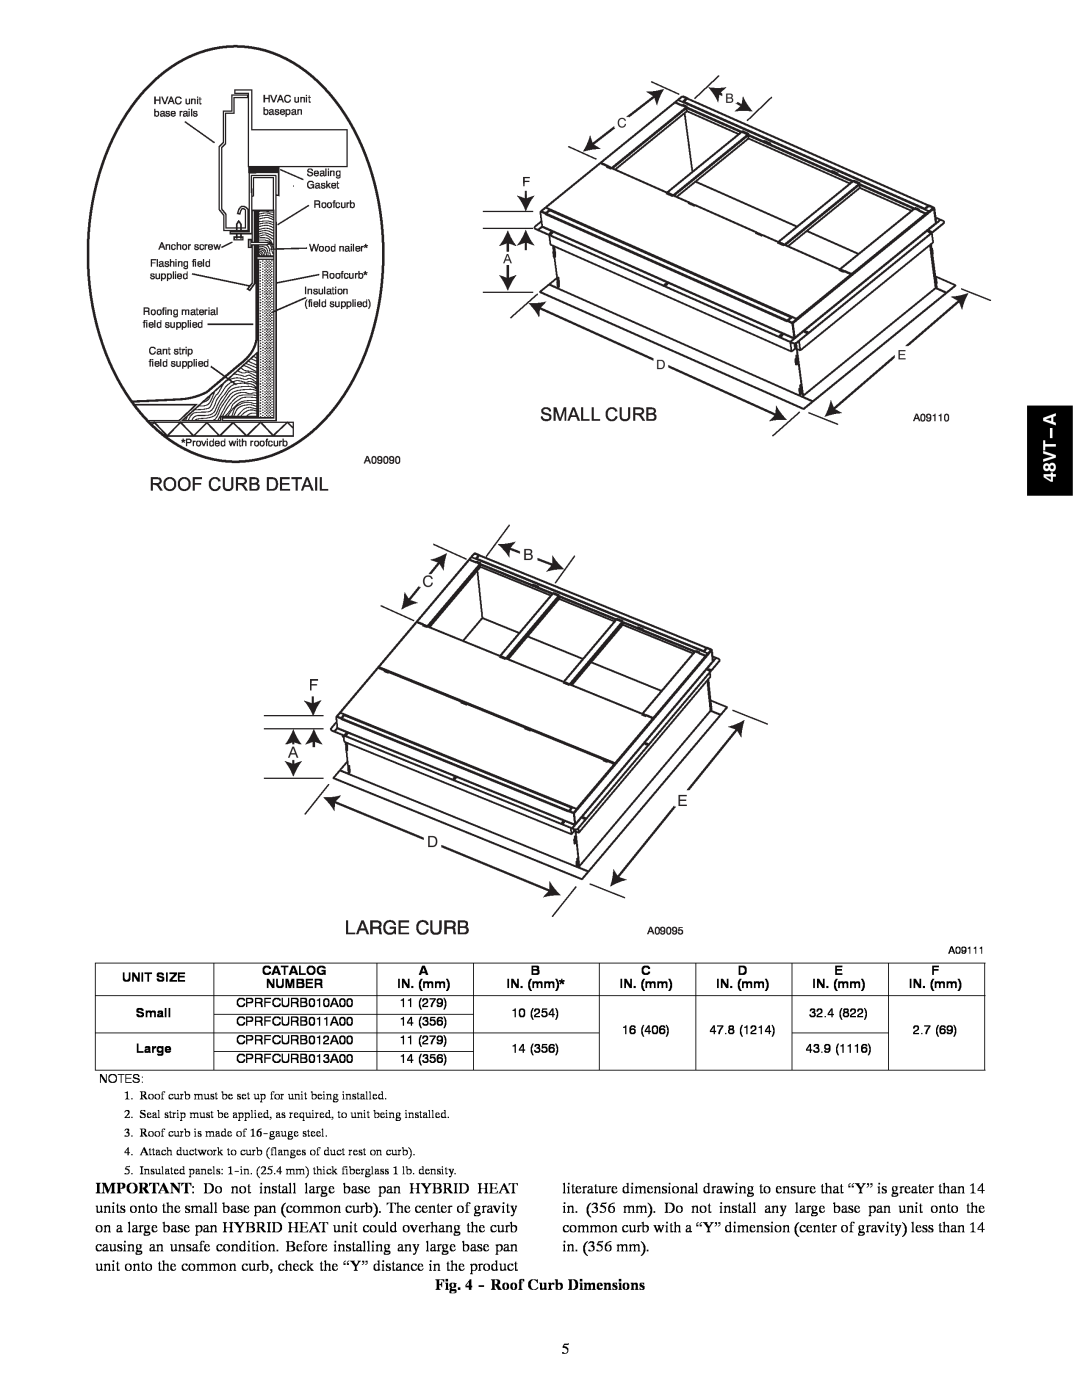 Carrier 48VT(N) installation instructions Roof Curb Dimensions, Small Curb, Roof Curb Detail, Large Curb 